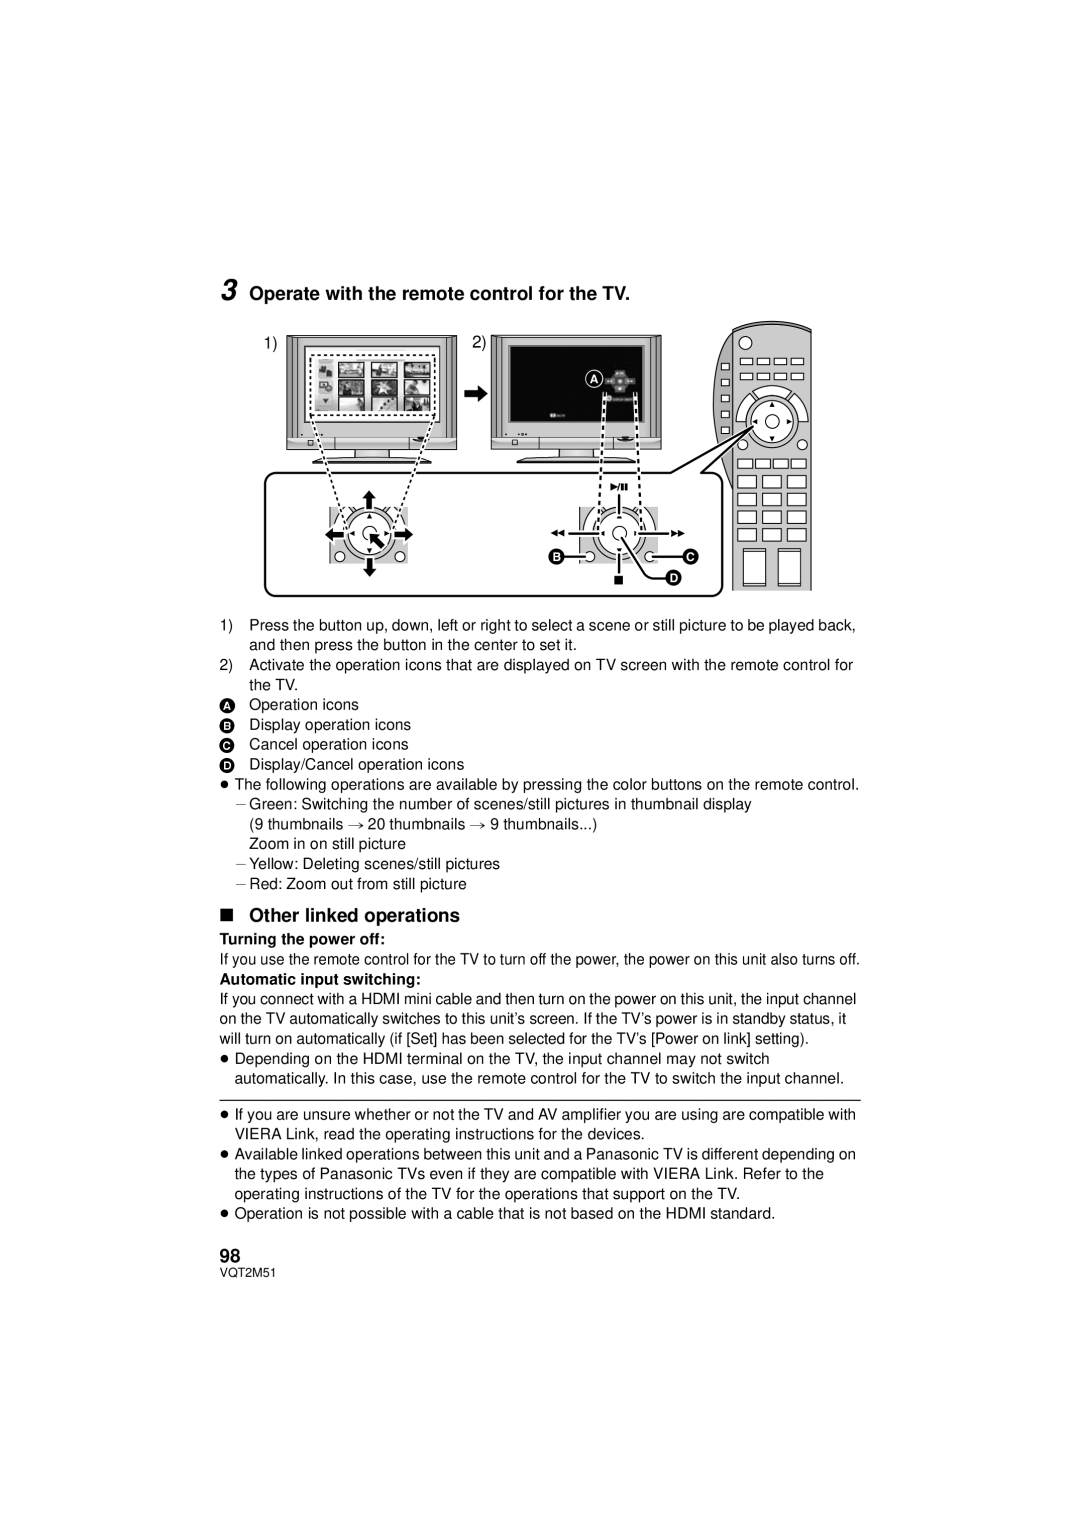 Panasonic HDC-TM55P/PC Operate with the remote control for the TV, ∫ Other linked operations, Turning the power off 